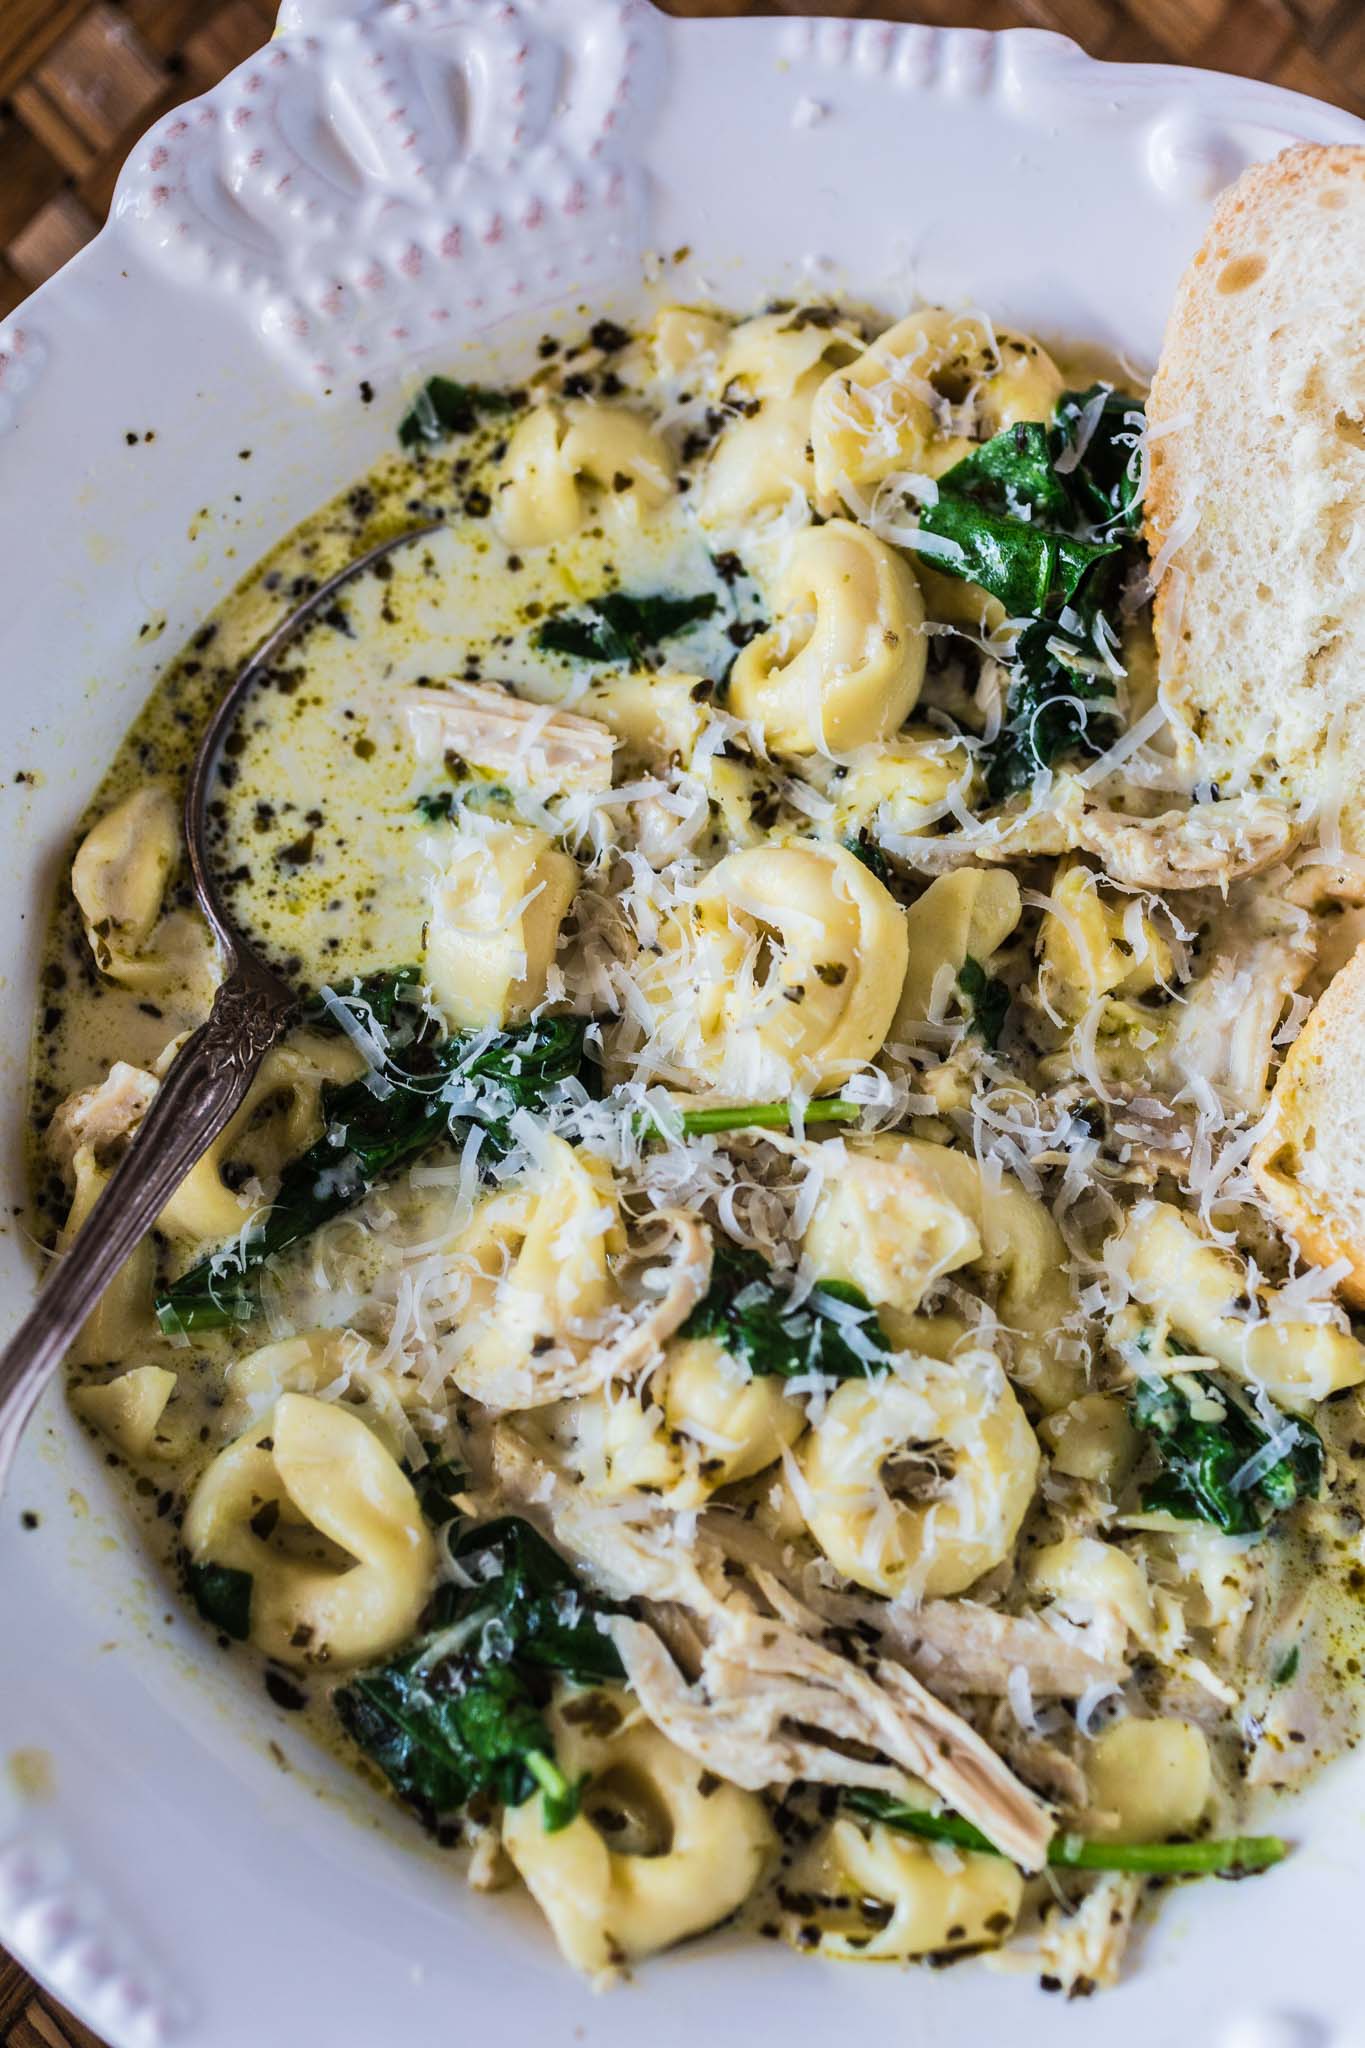 Creamy Chicken Tortellini Soup | www.oliviascuisine.com | You won't believe how easy this Creamy Chicken Tortellini Soup is! Hearty, comforting and made in the slow cooker. It really doesn't get easier than that!